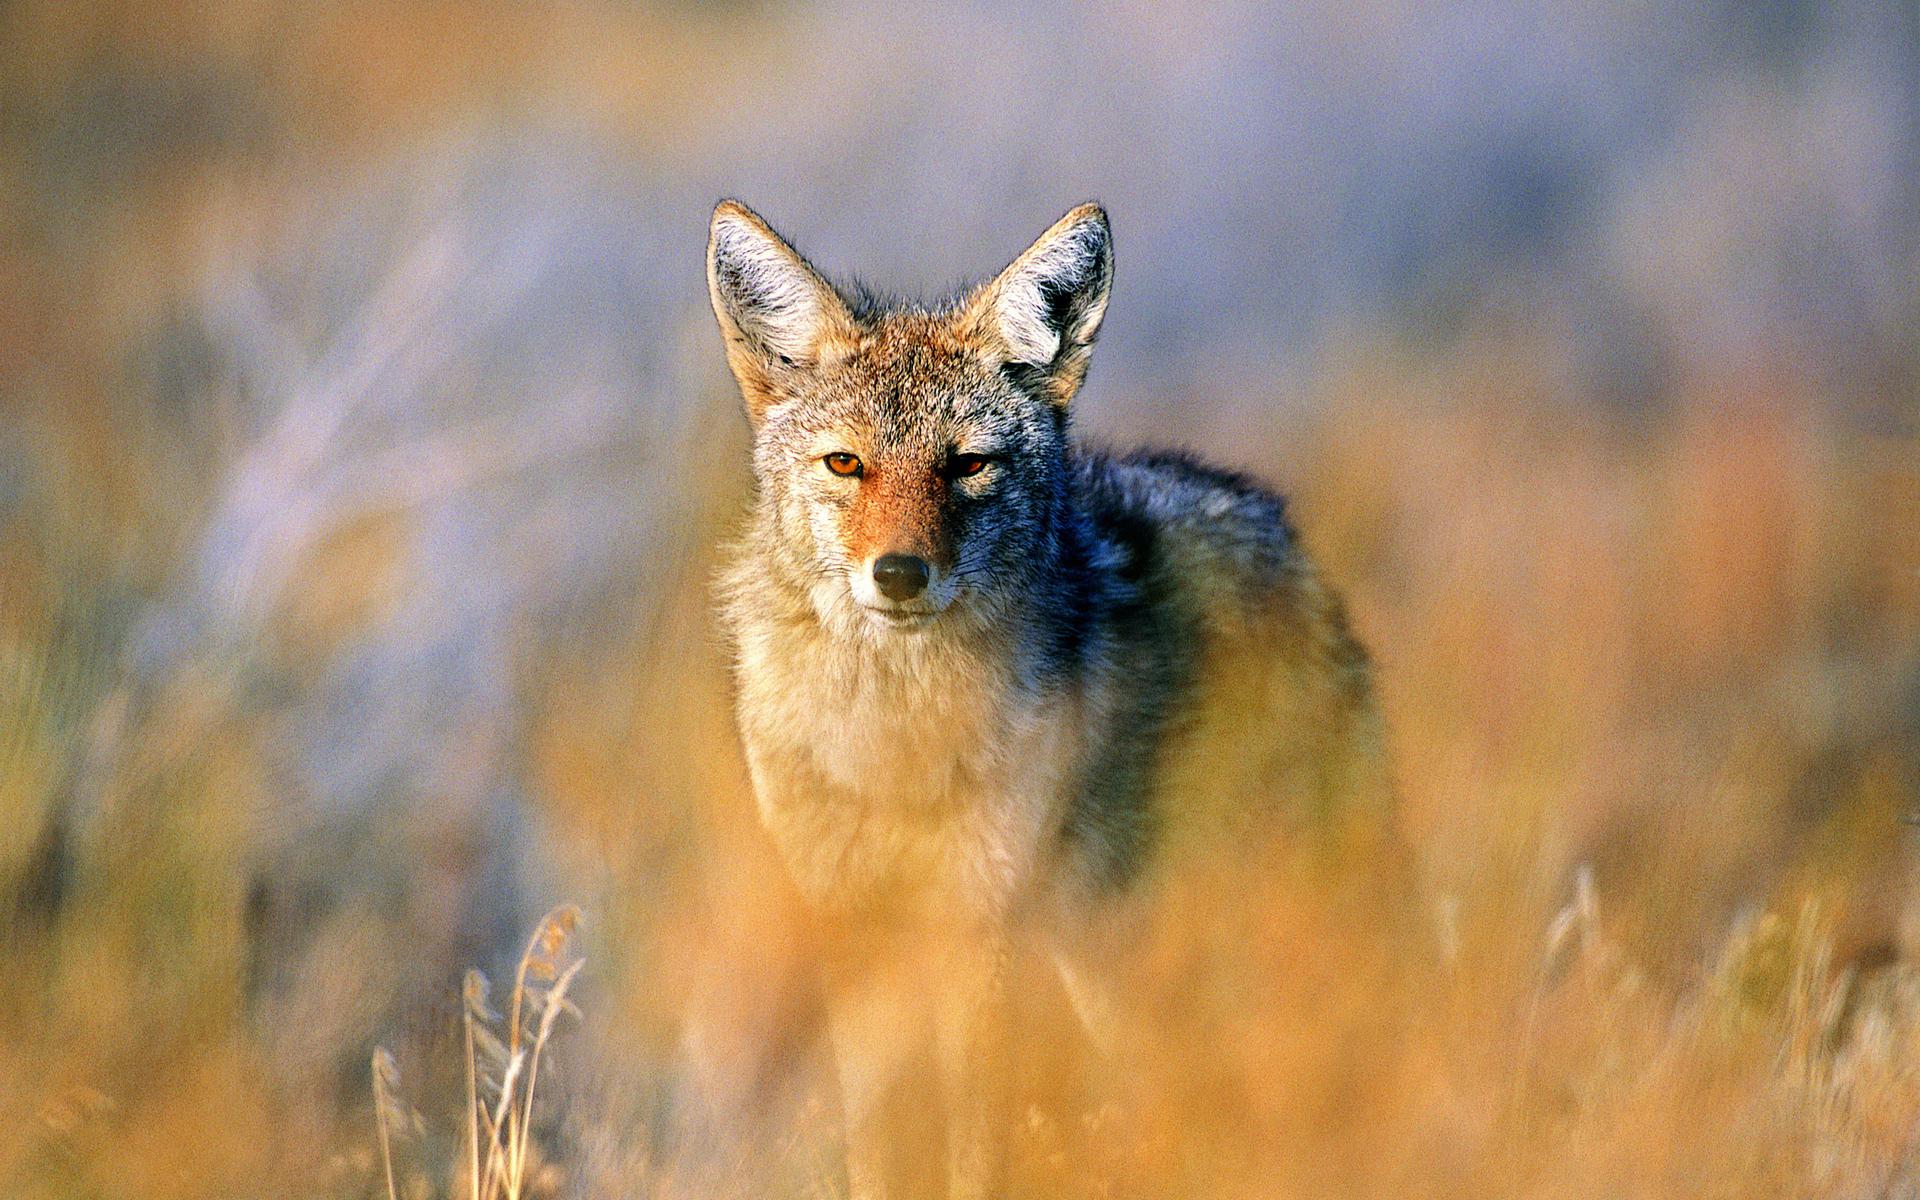 Coyote High Quality And Resolution Wallpaper On